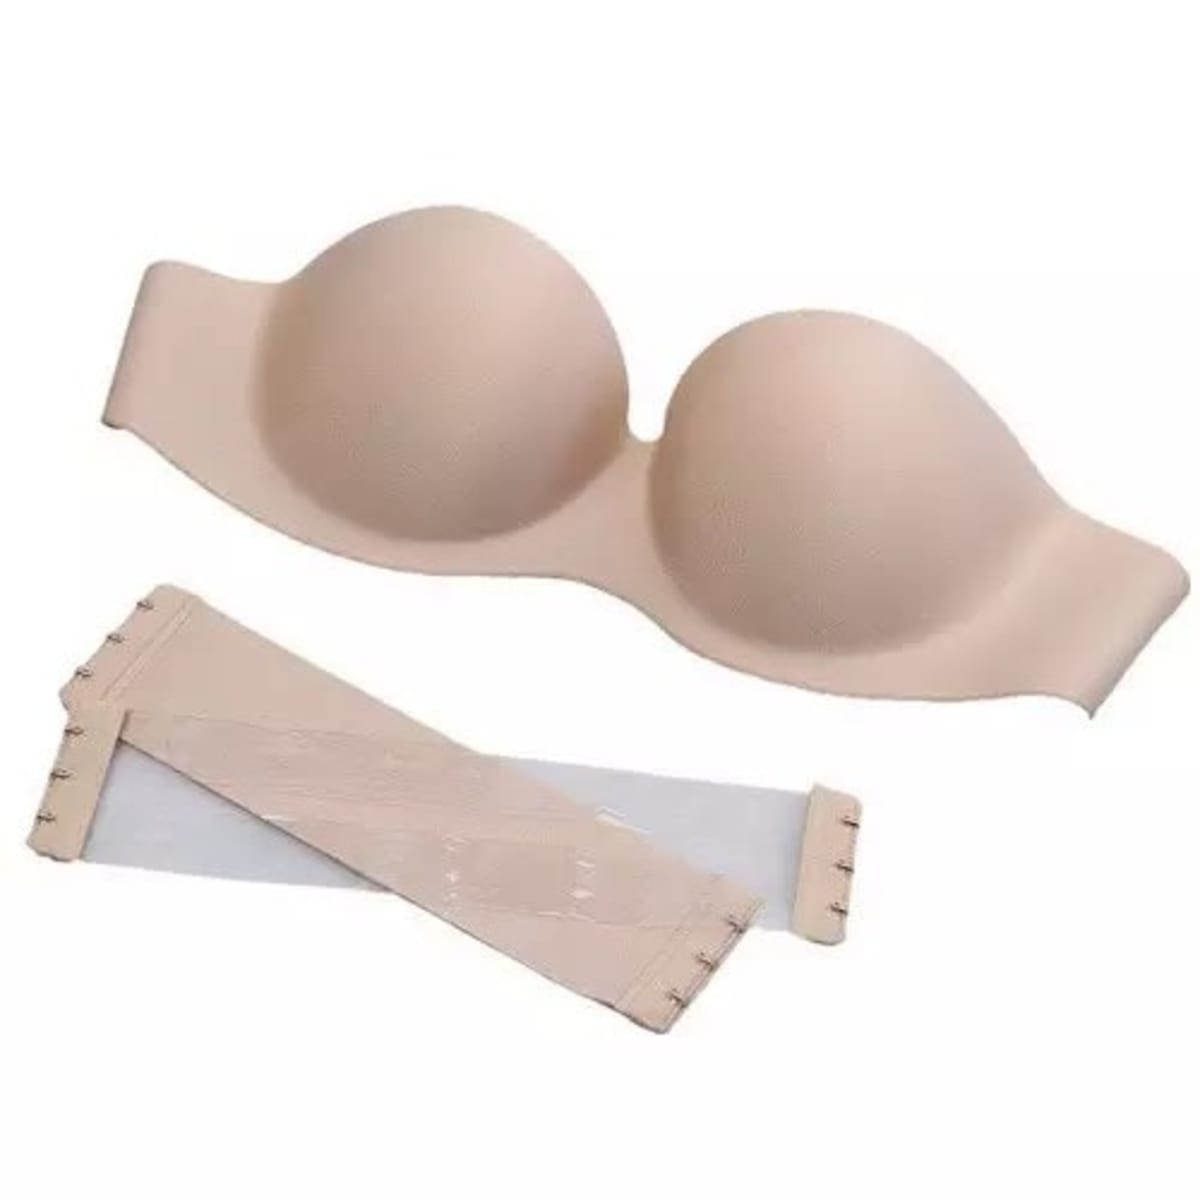 Strapless And Backless Invisible Push Up Bra - Beige